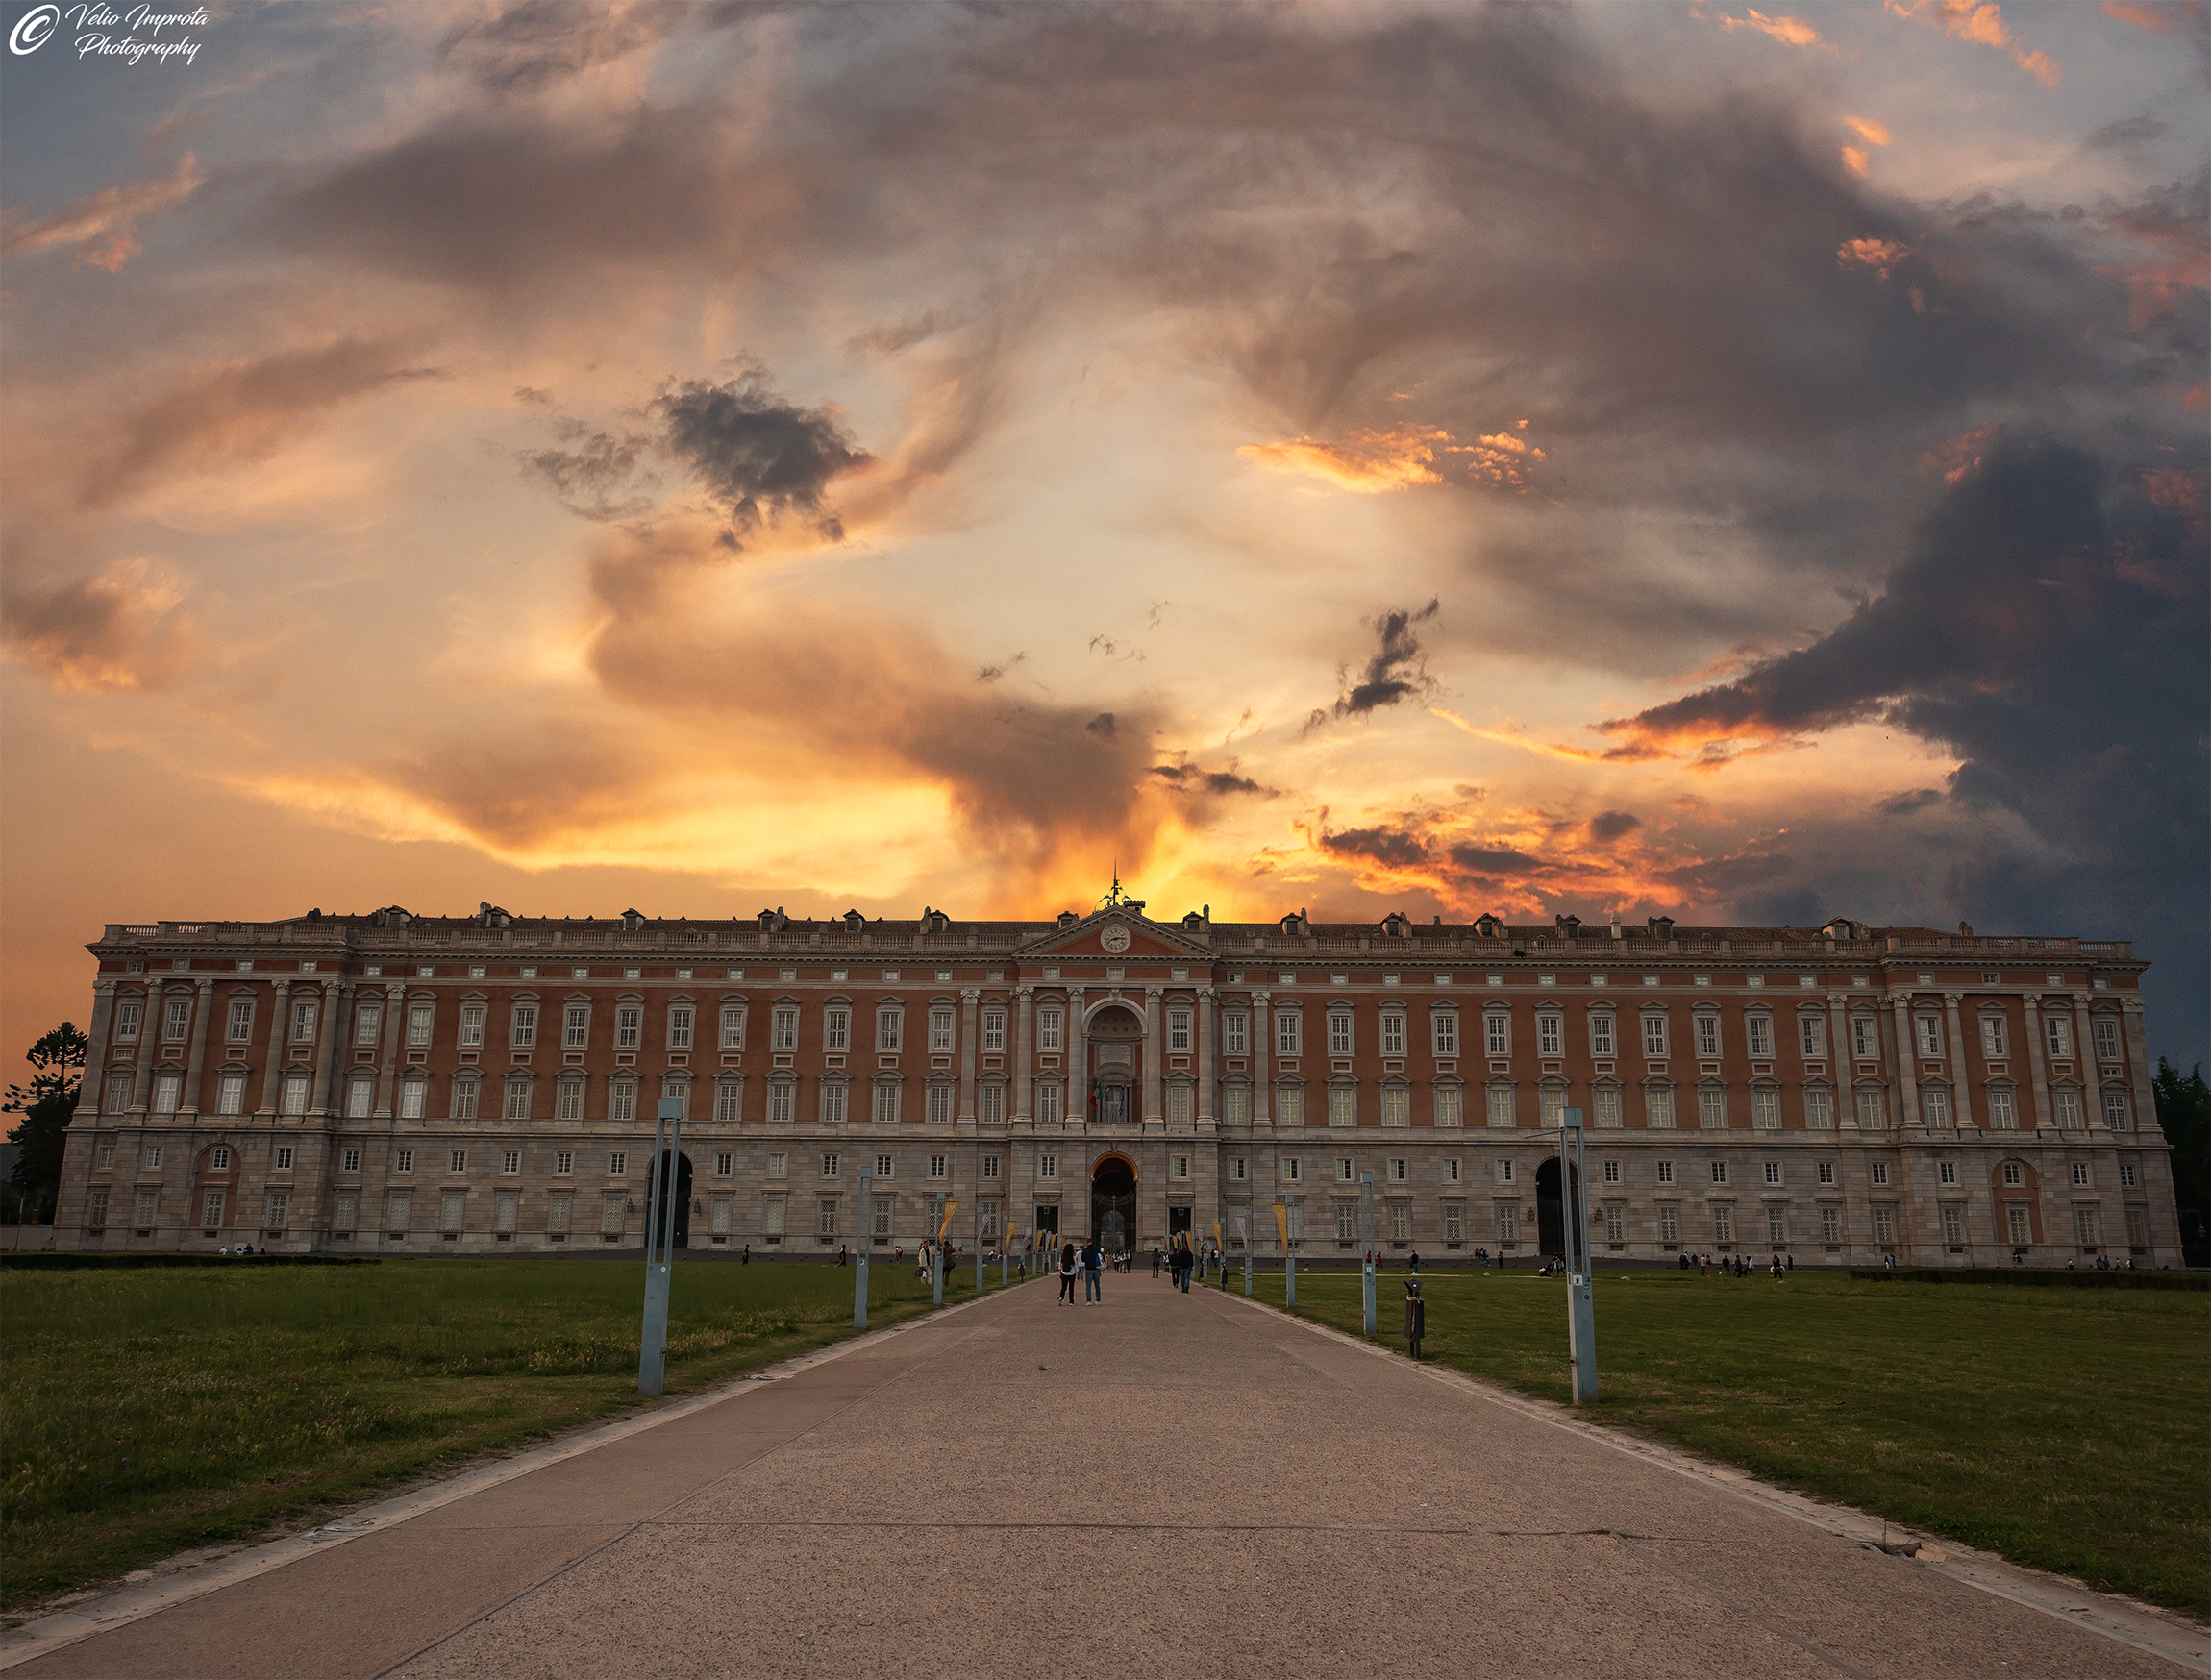 The Palace at sunset...